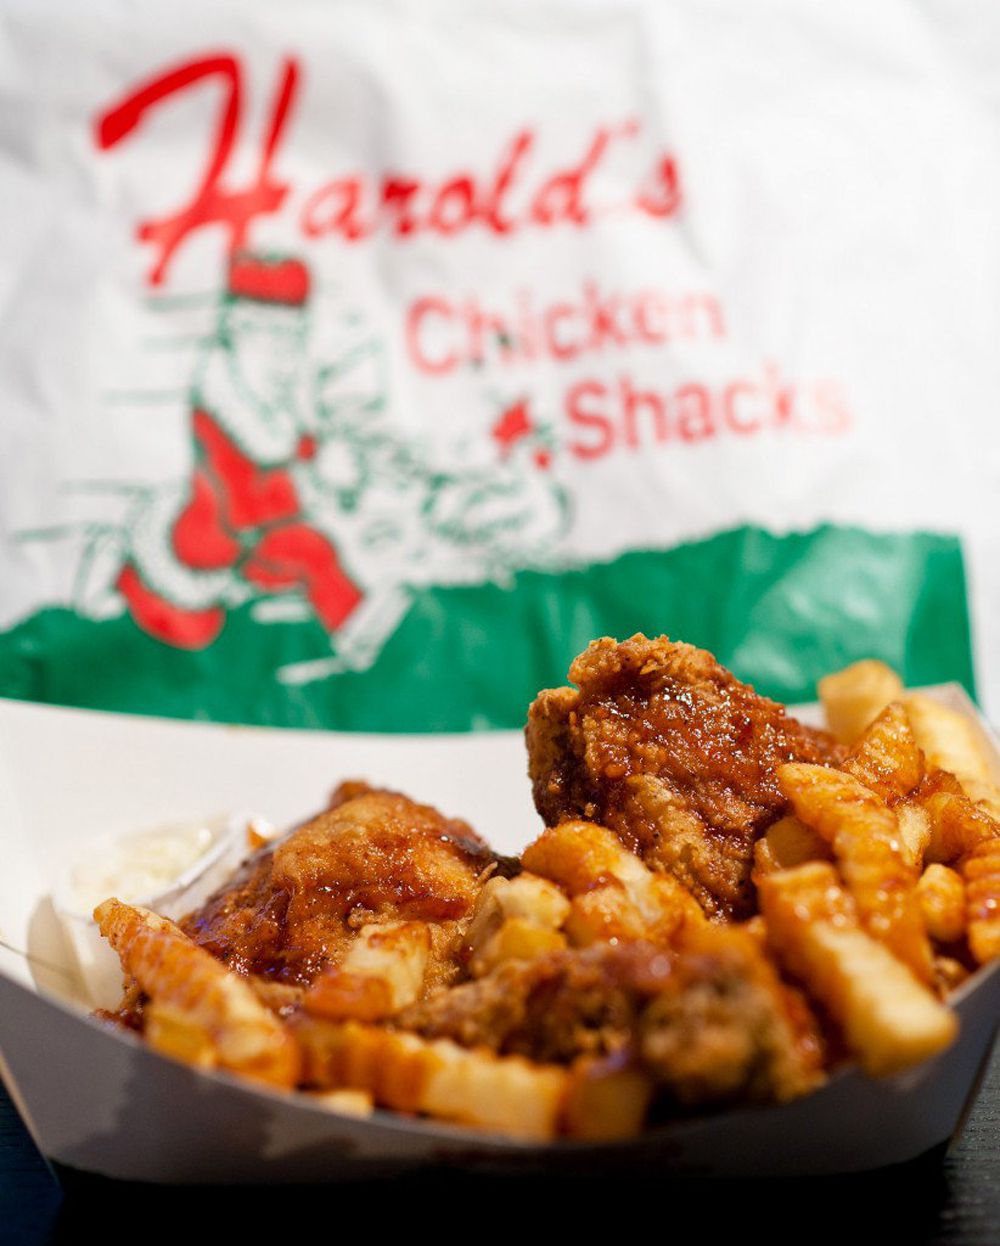 A serving of fried chicken and fries from Chicago’s famous Harold’s&nbsp;Chicken Shack.